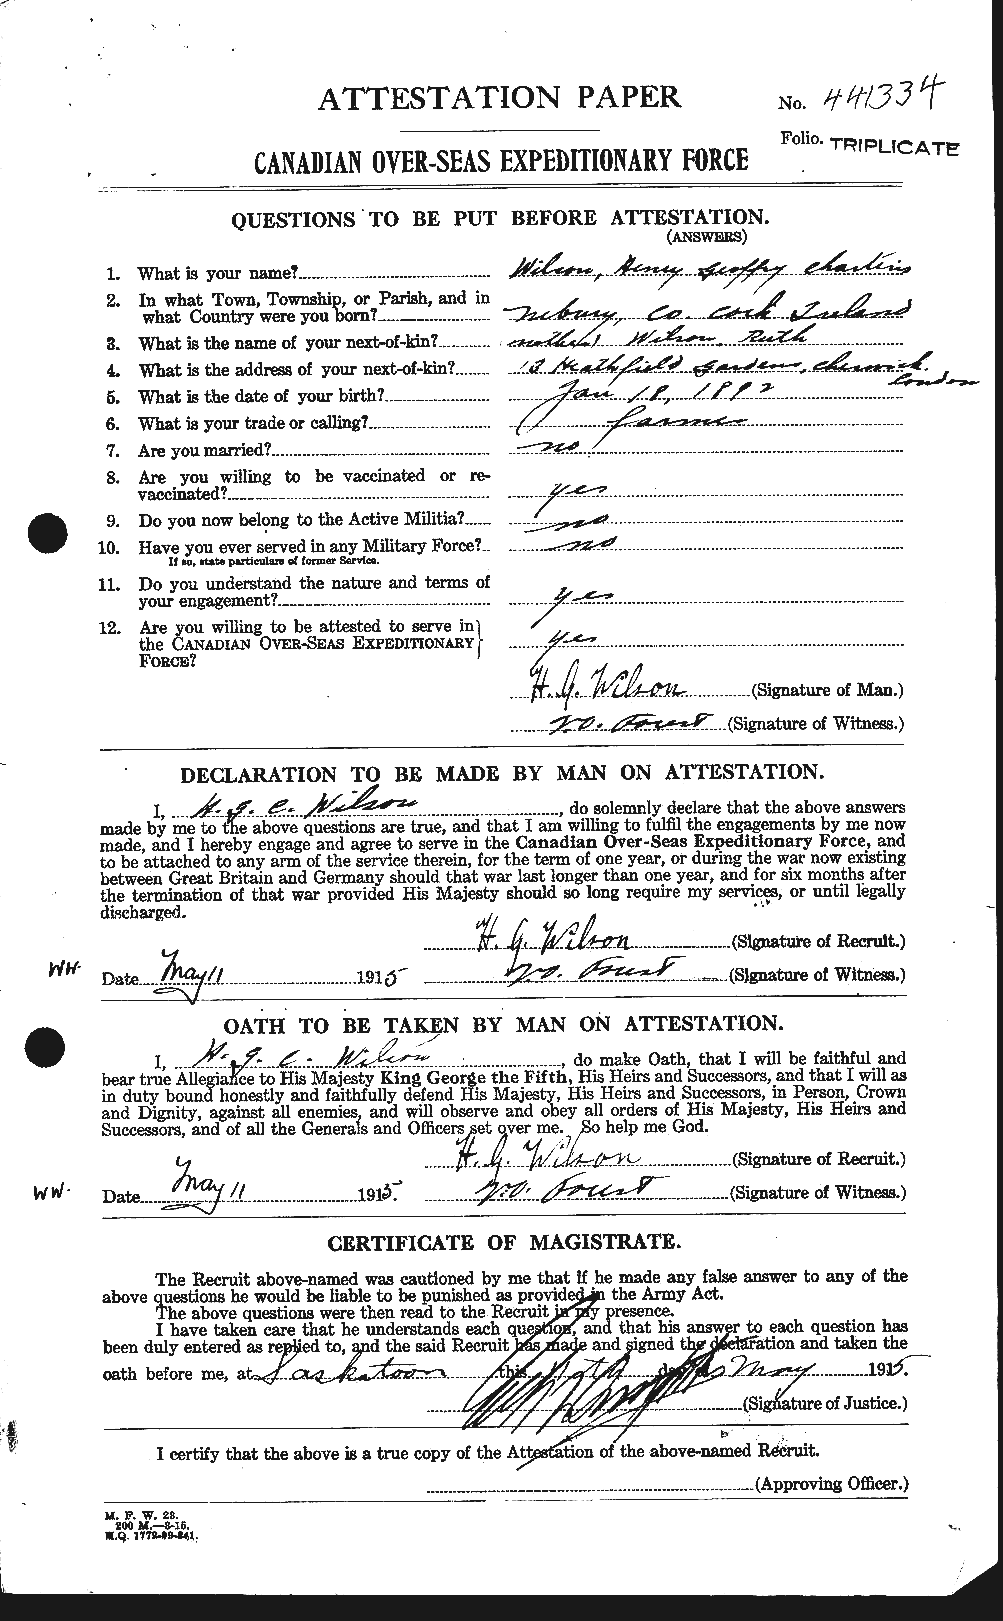 Personnel Records of the First World War - CEF 679523a